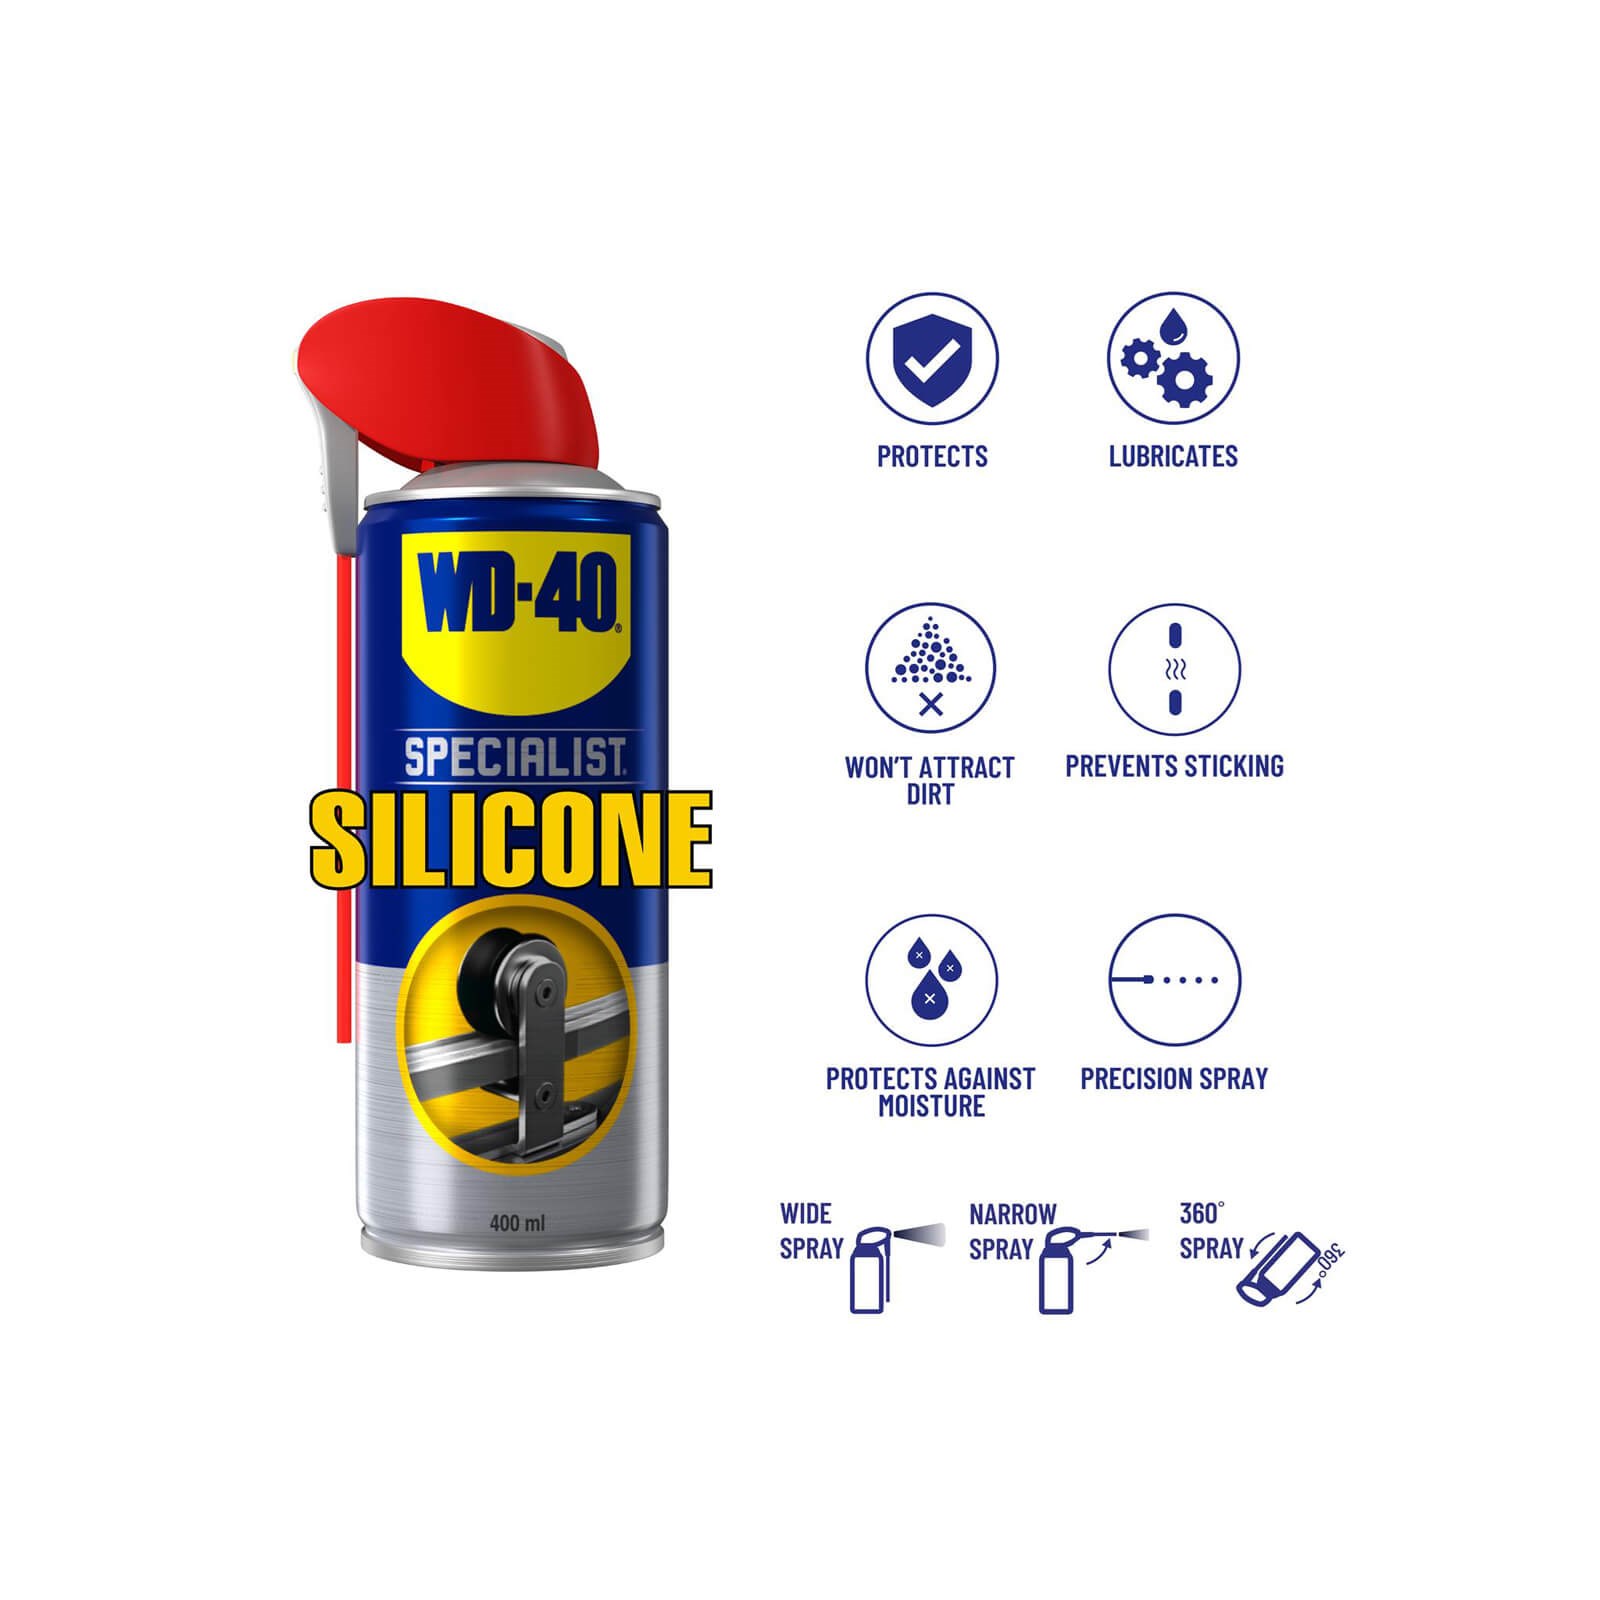 WD-40 SPECIALIST Silicone Lubricant 100ml (Actual safety data